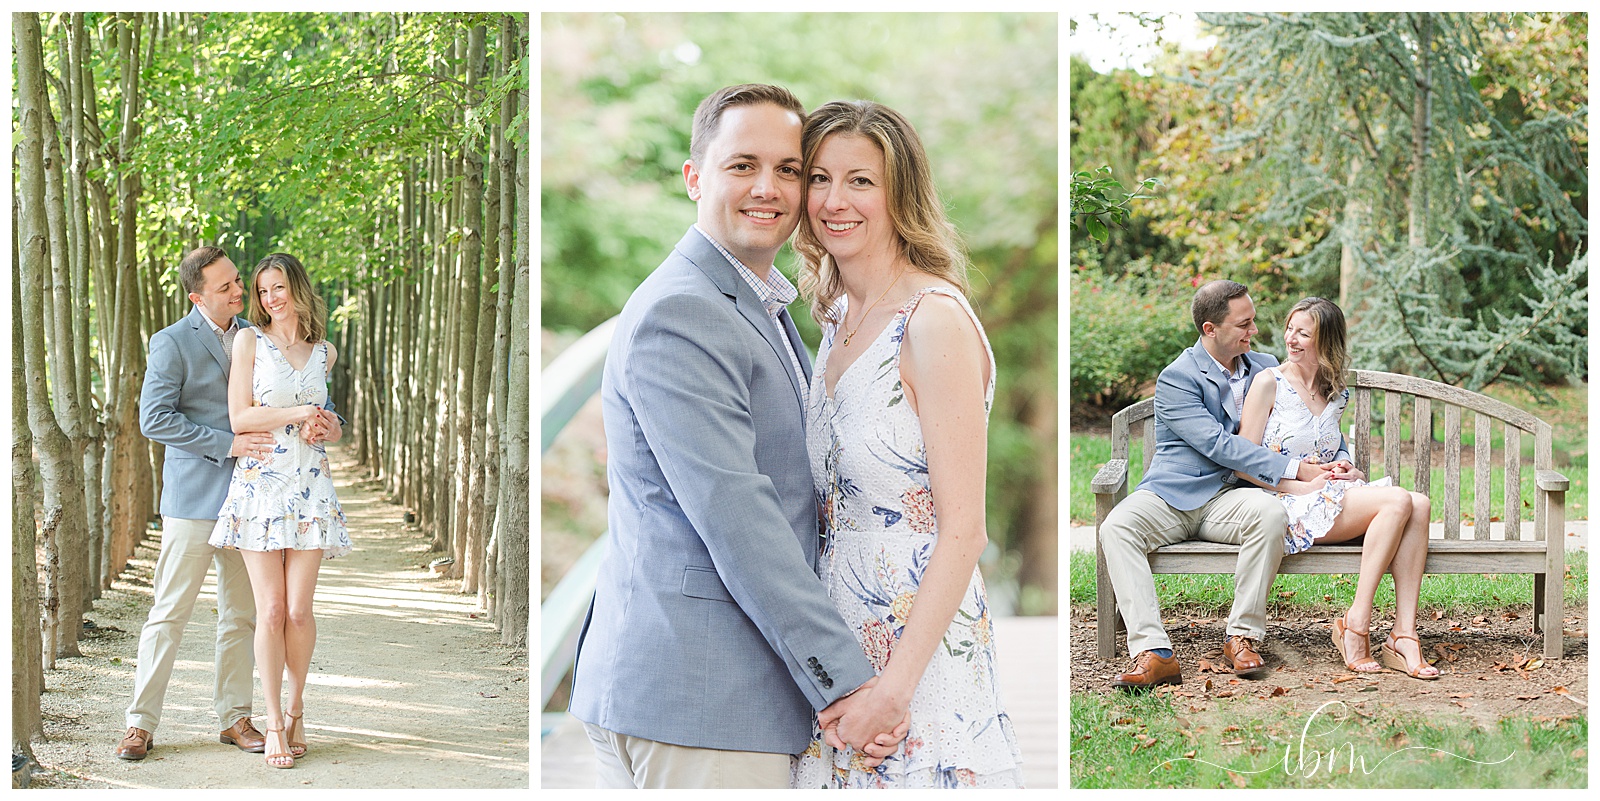 kerry-stephen-grounds-for-sculpture-engagement-session-imagery-by-marianne-fall